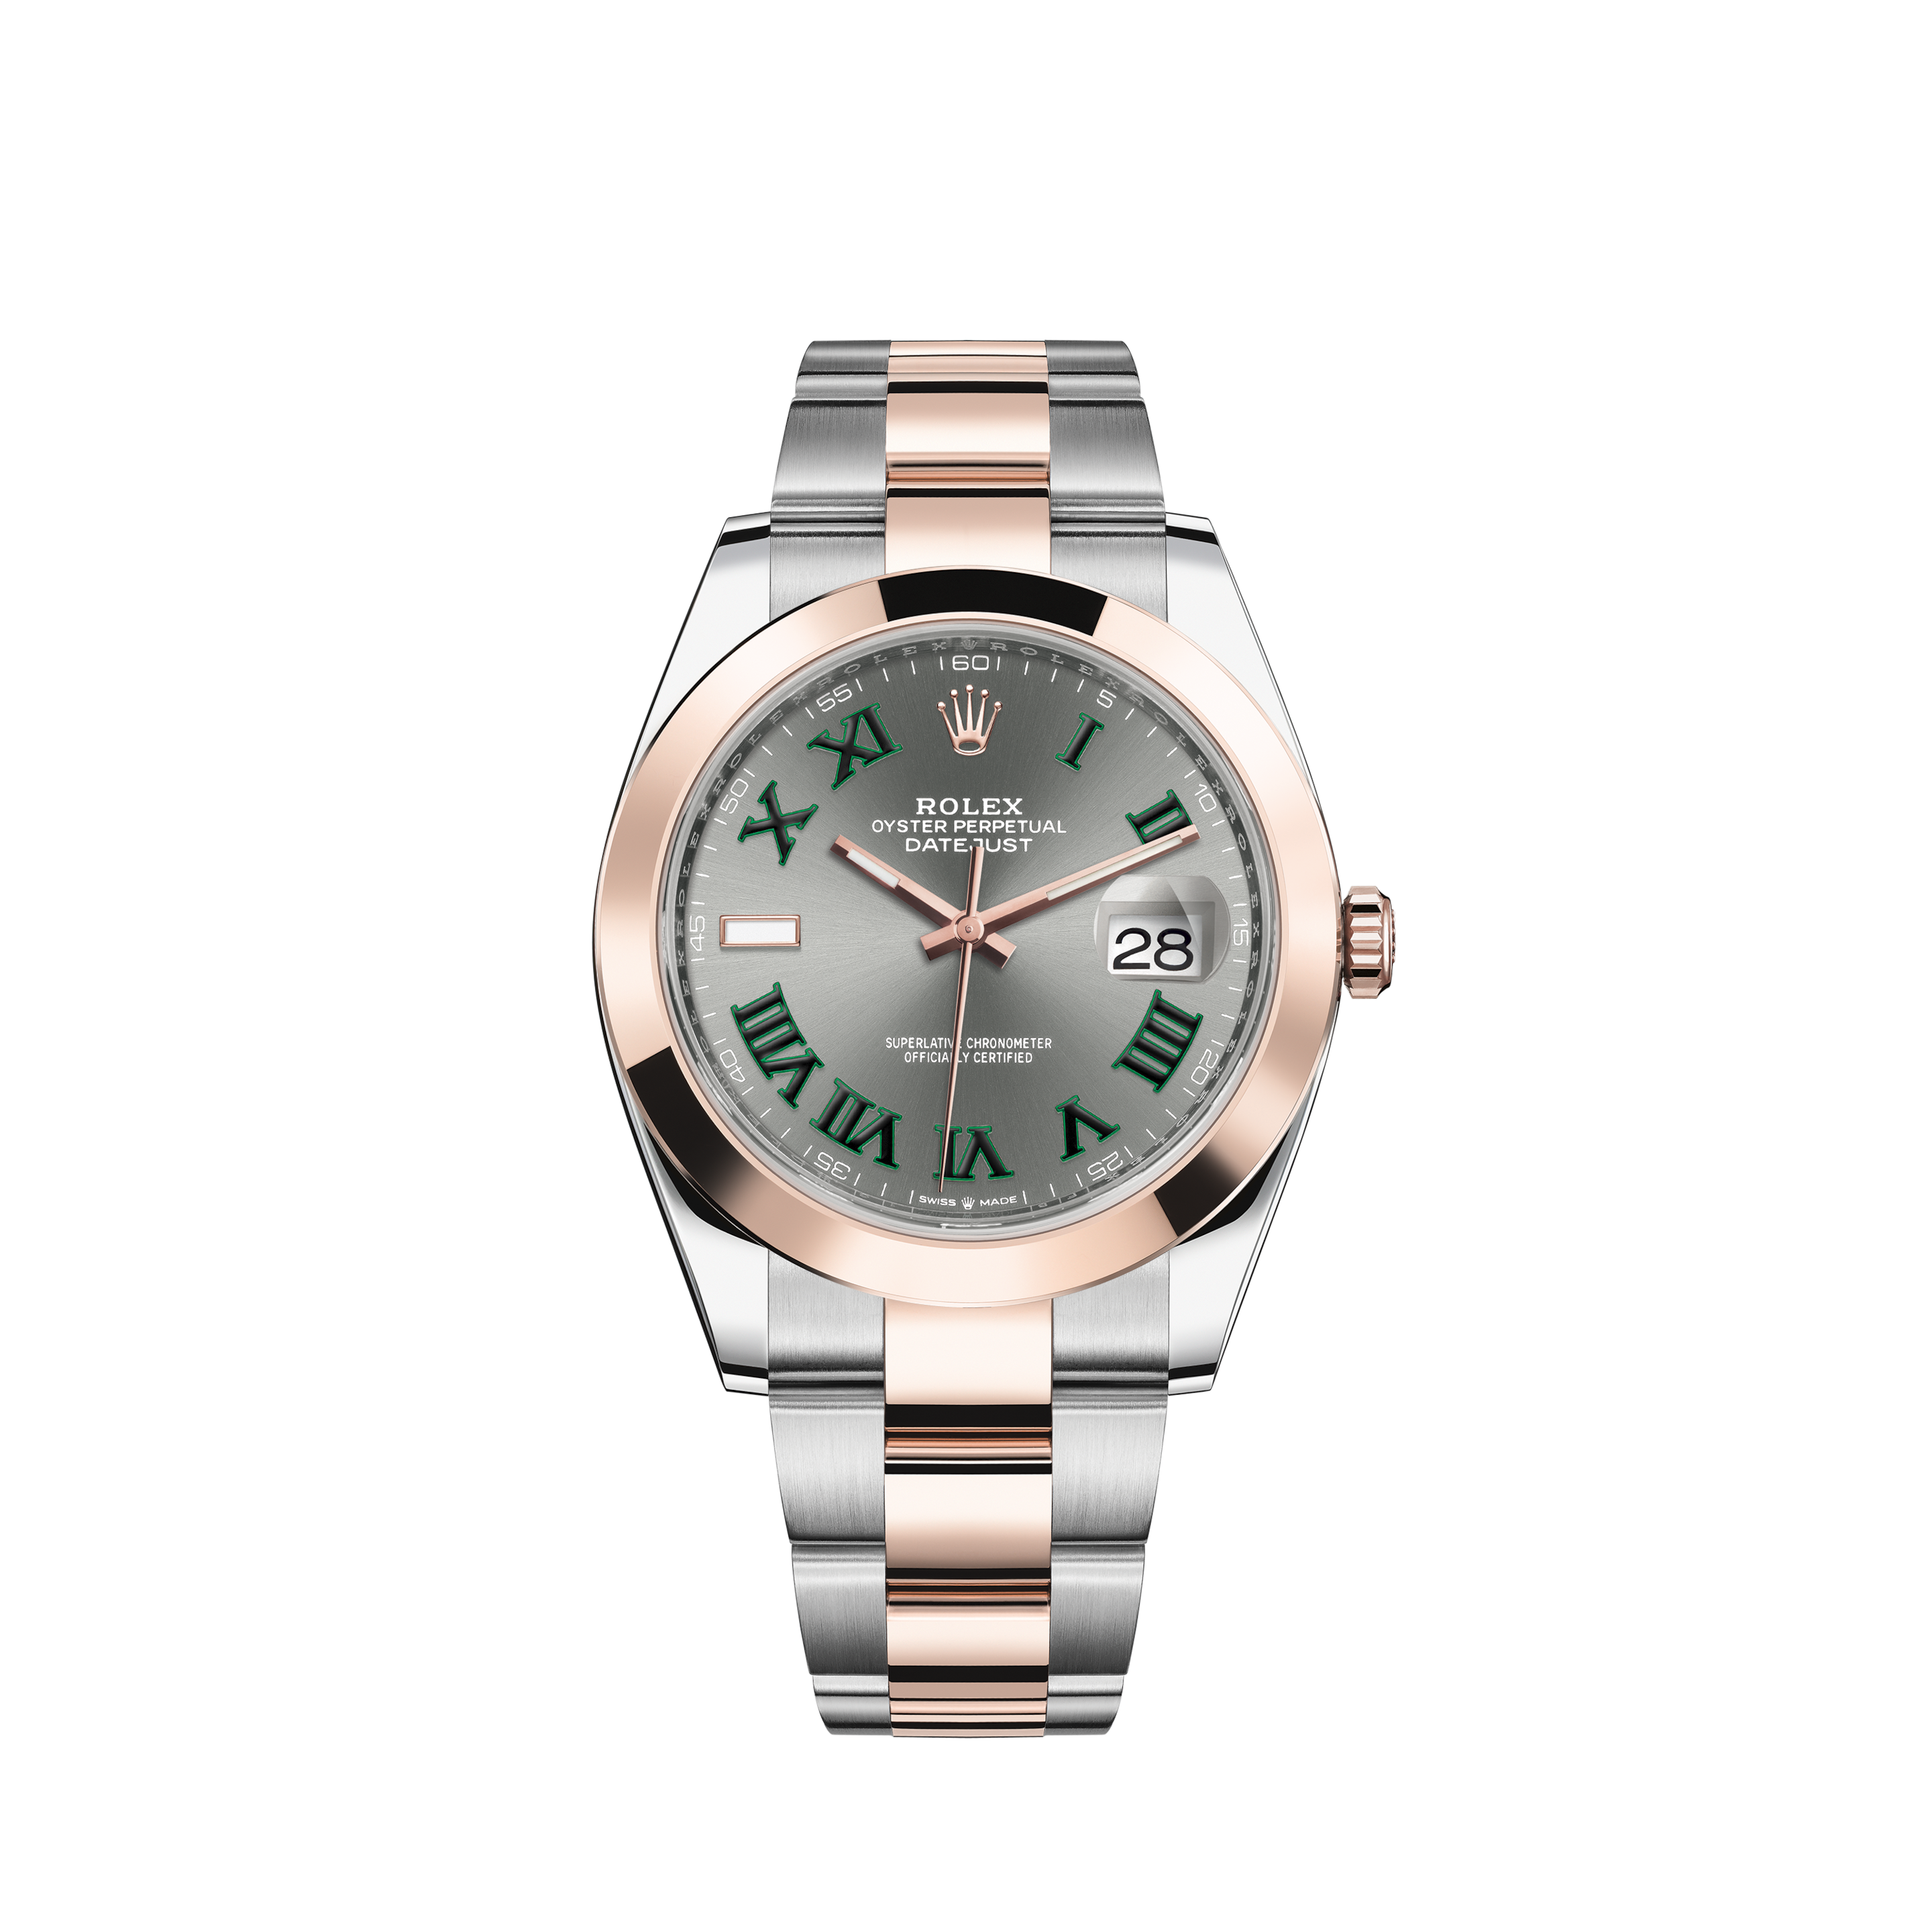 Rolex 16220 Datejust 36mm Stainless Steel Pink Diamond Dial WatchRolex 16220 Datejust Box &papers